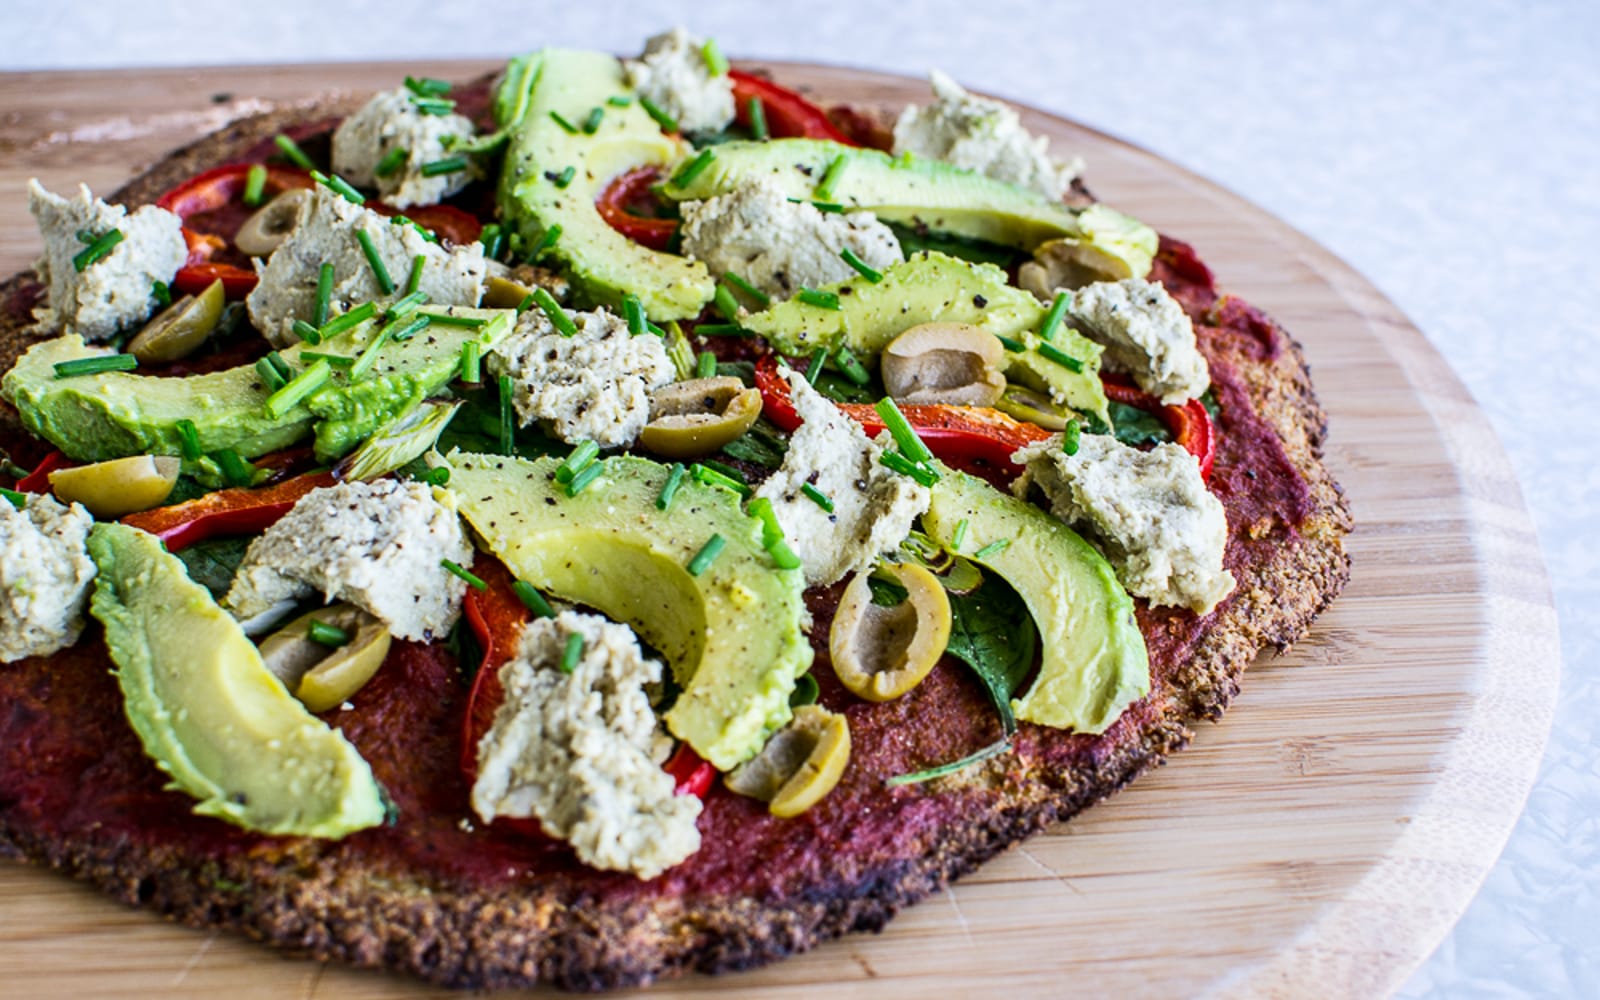 Plant-based pizza with chickpea and cauliflower crust